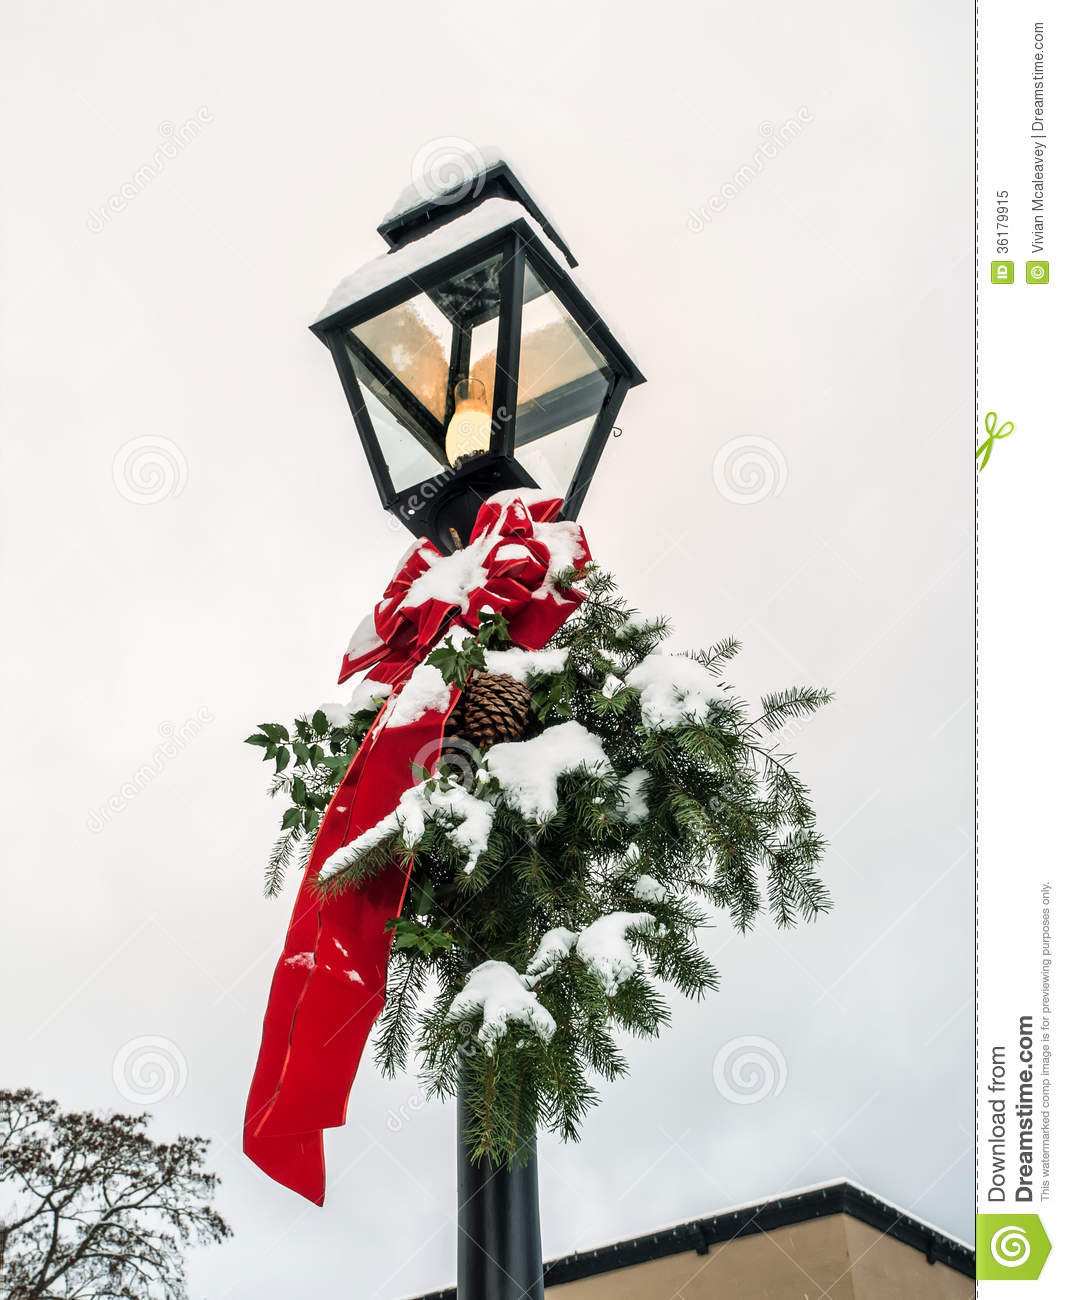 Christmas Lamp Post With Snow
 Lamp Post With Christmas Decoration Stock Image Image of